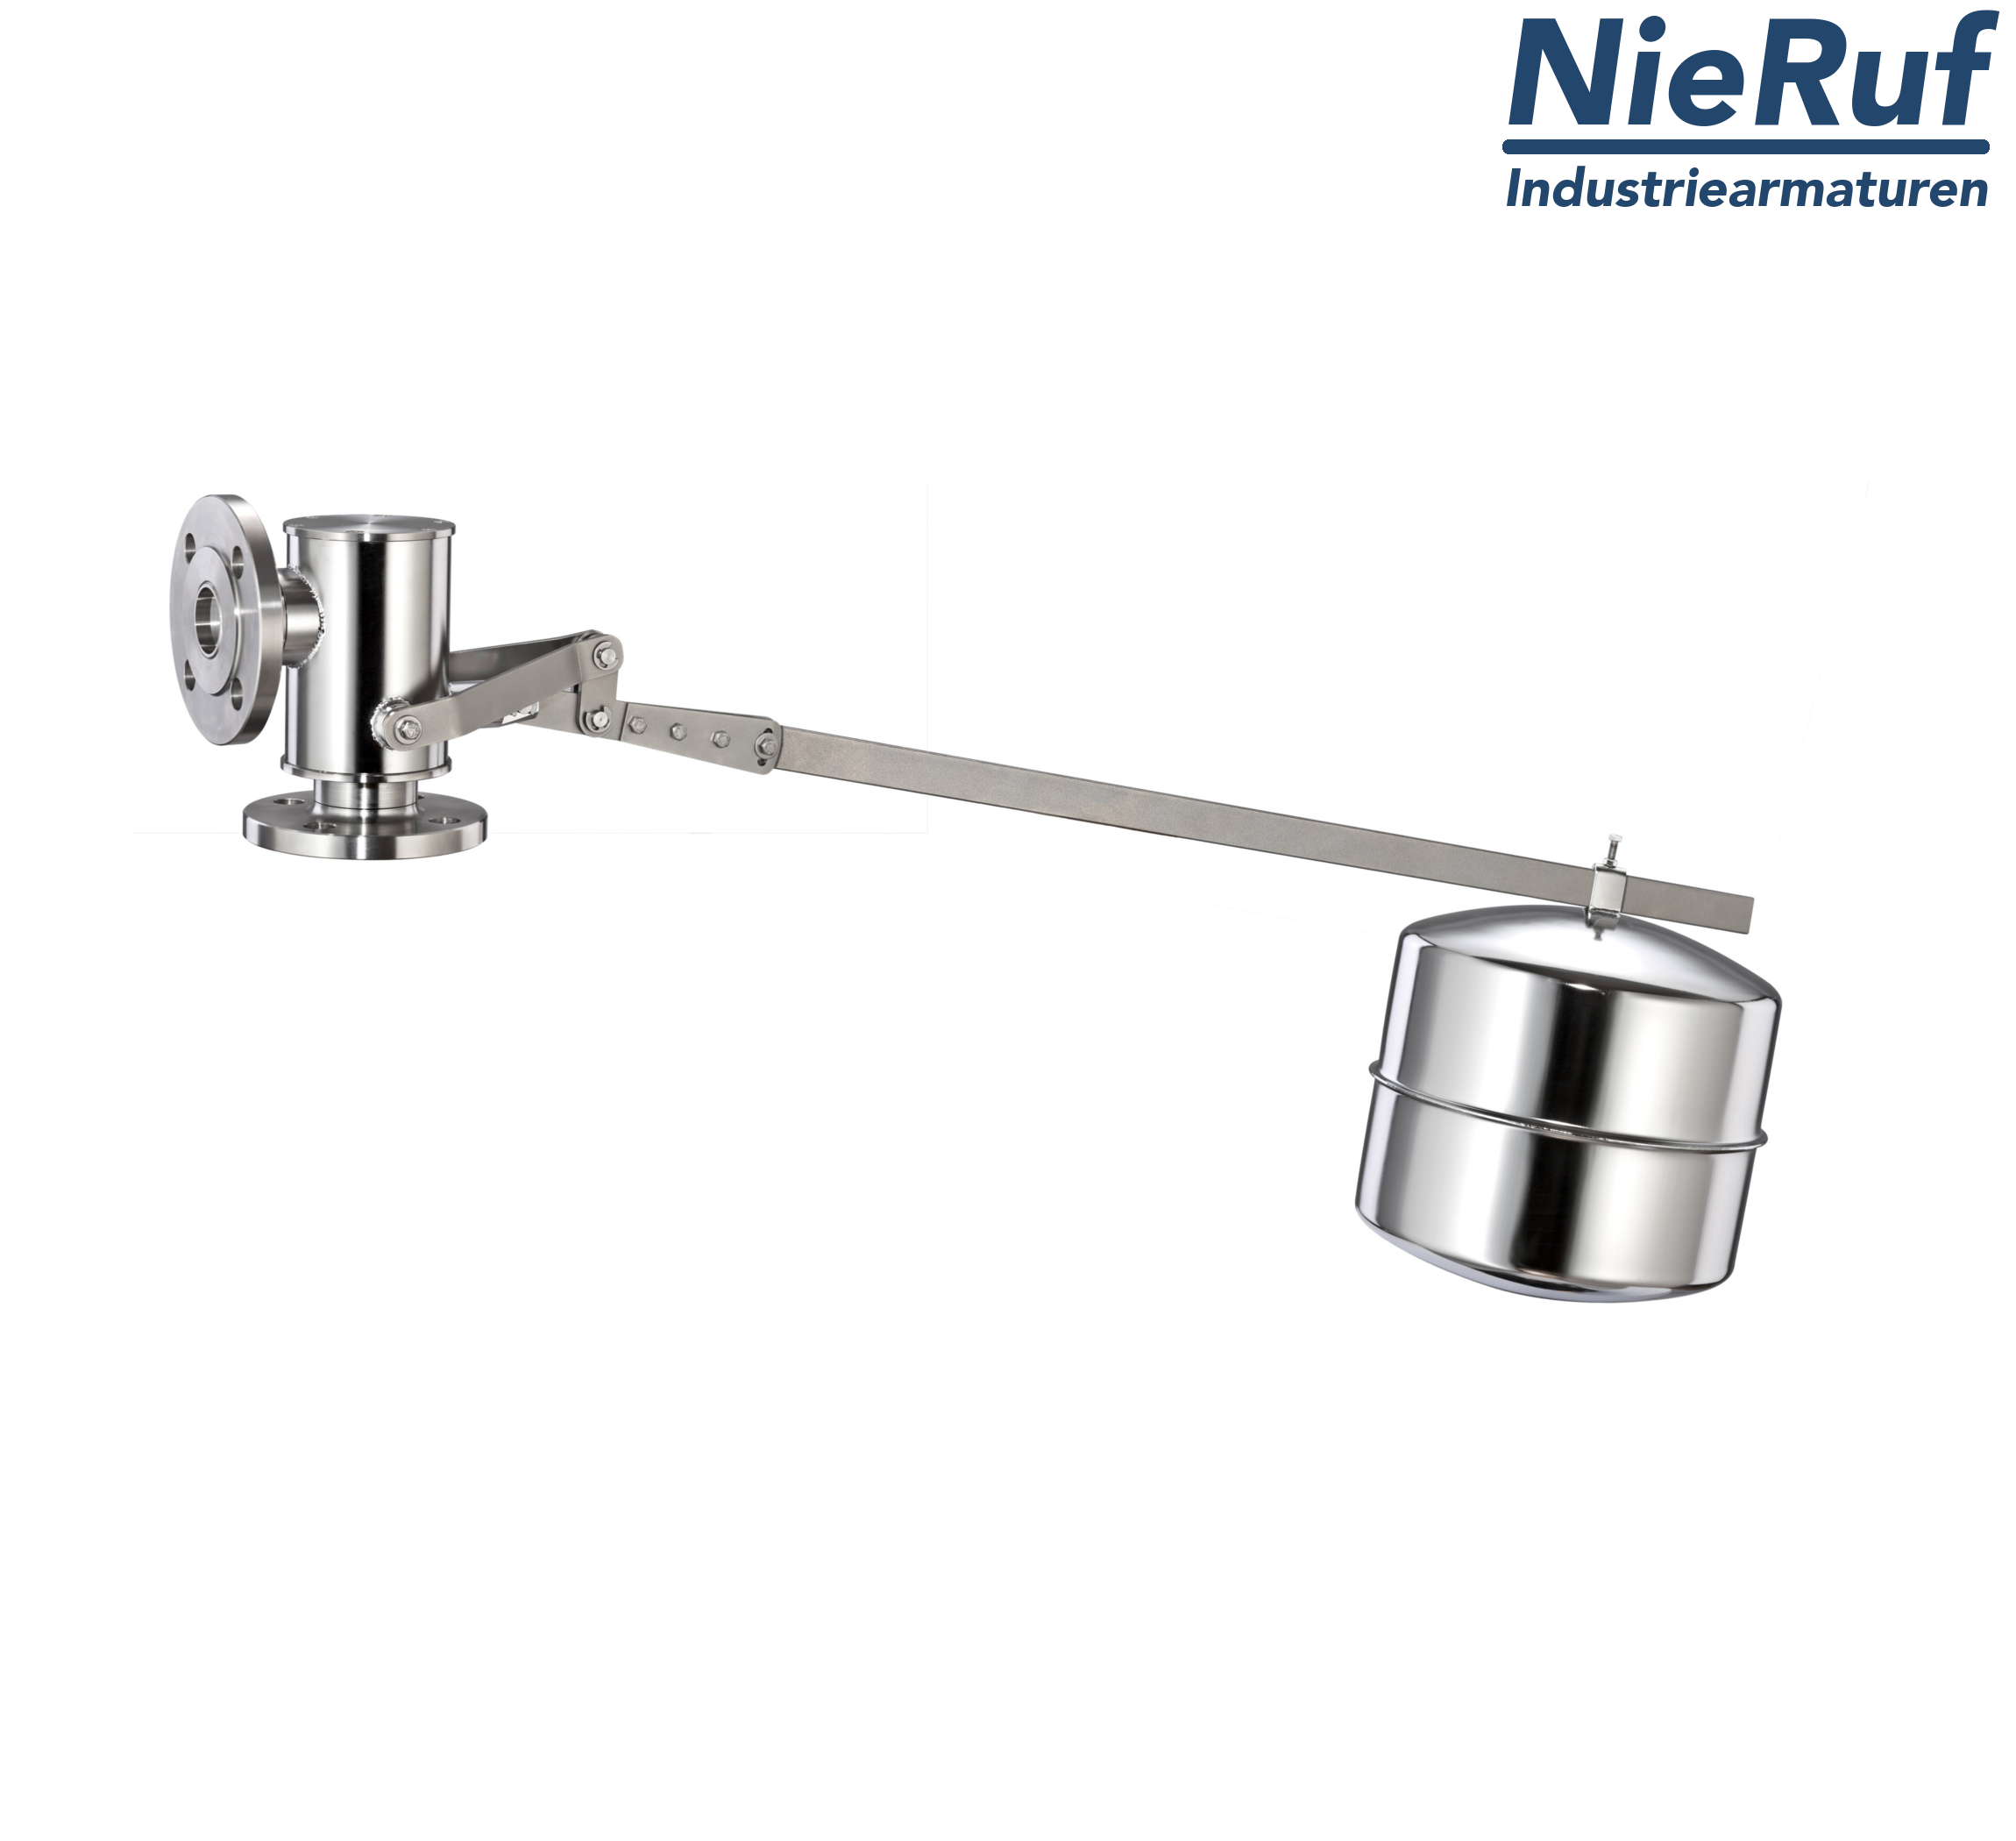 Float valve DN80 - 3" stainless steel FKM SW07 floats: in stainless steel